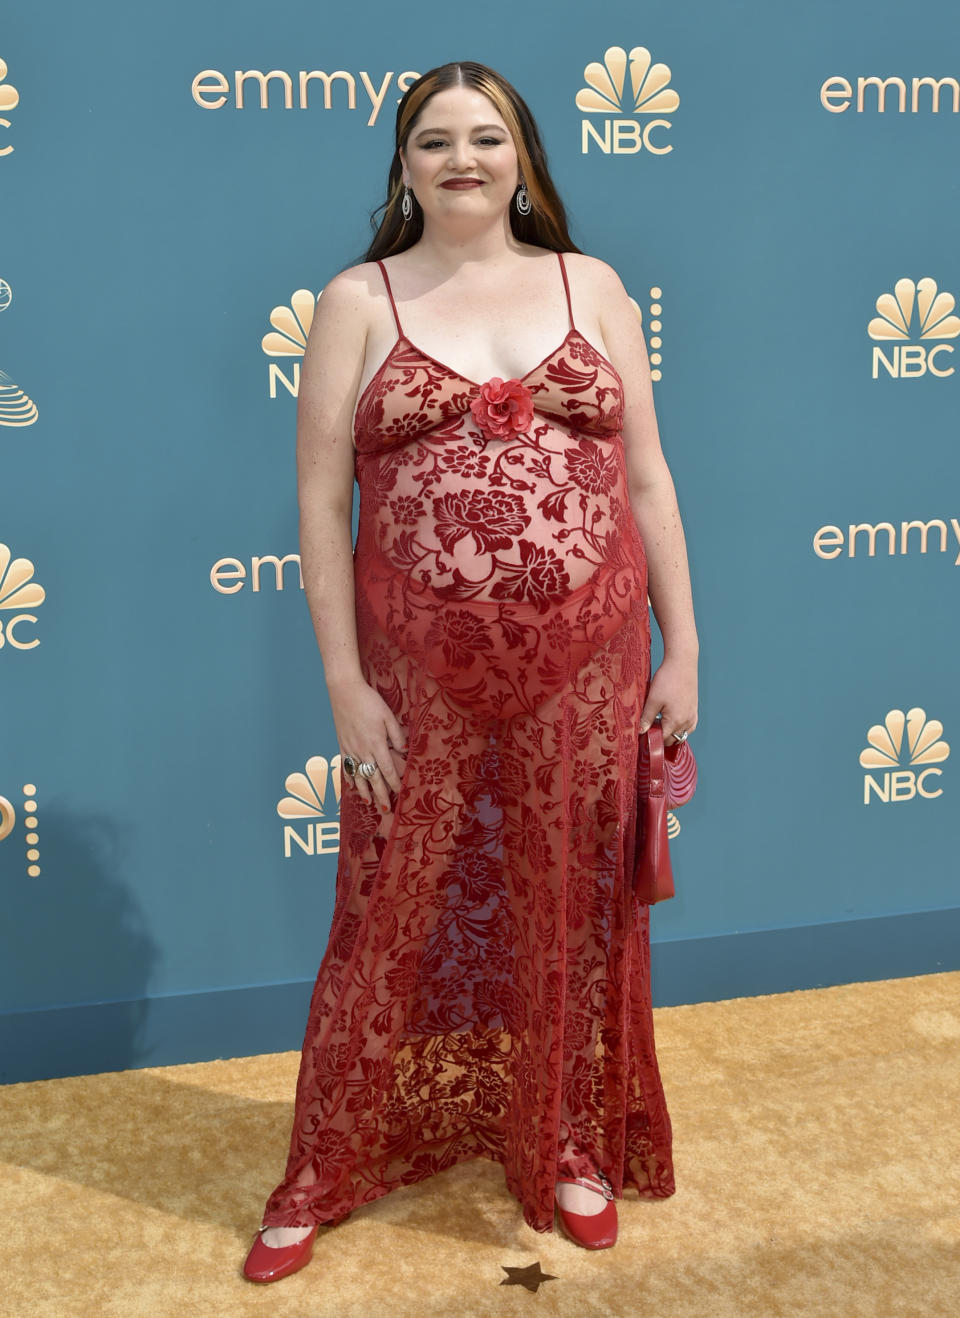 Megan Stalter arrives at the 74th Primetime Emmy Awards on Monday, Sept. 12, 2022, at the Microsoft Theater in Los Angeles. (Photo by Richard Shotwell/Invision/AP)